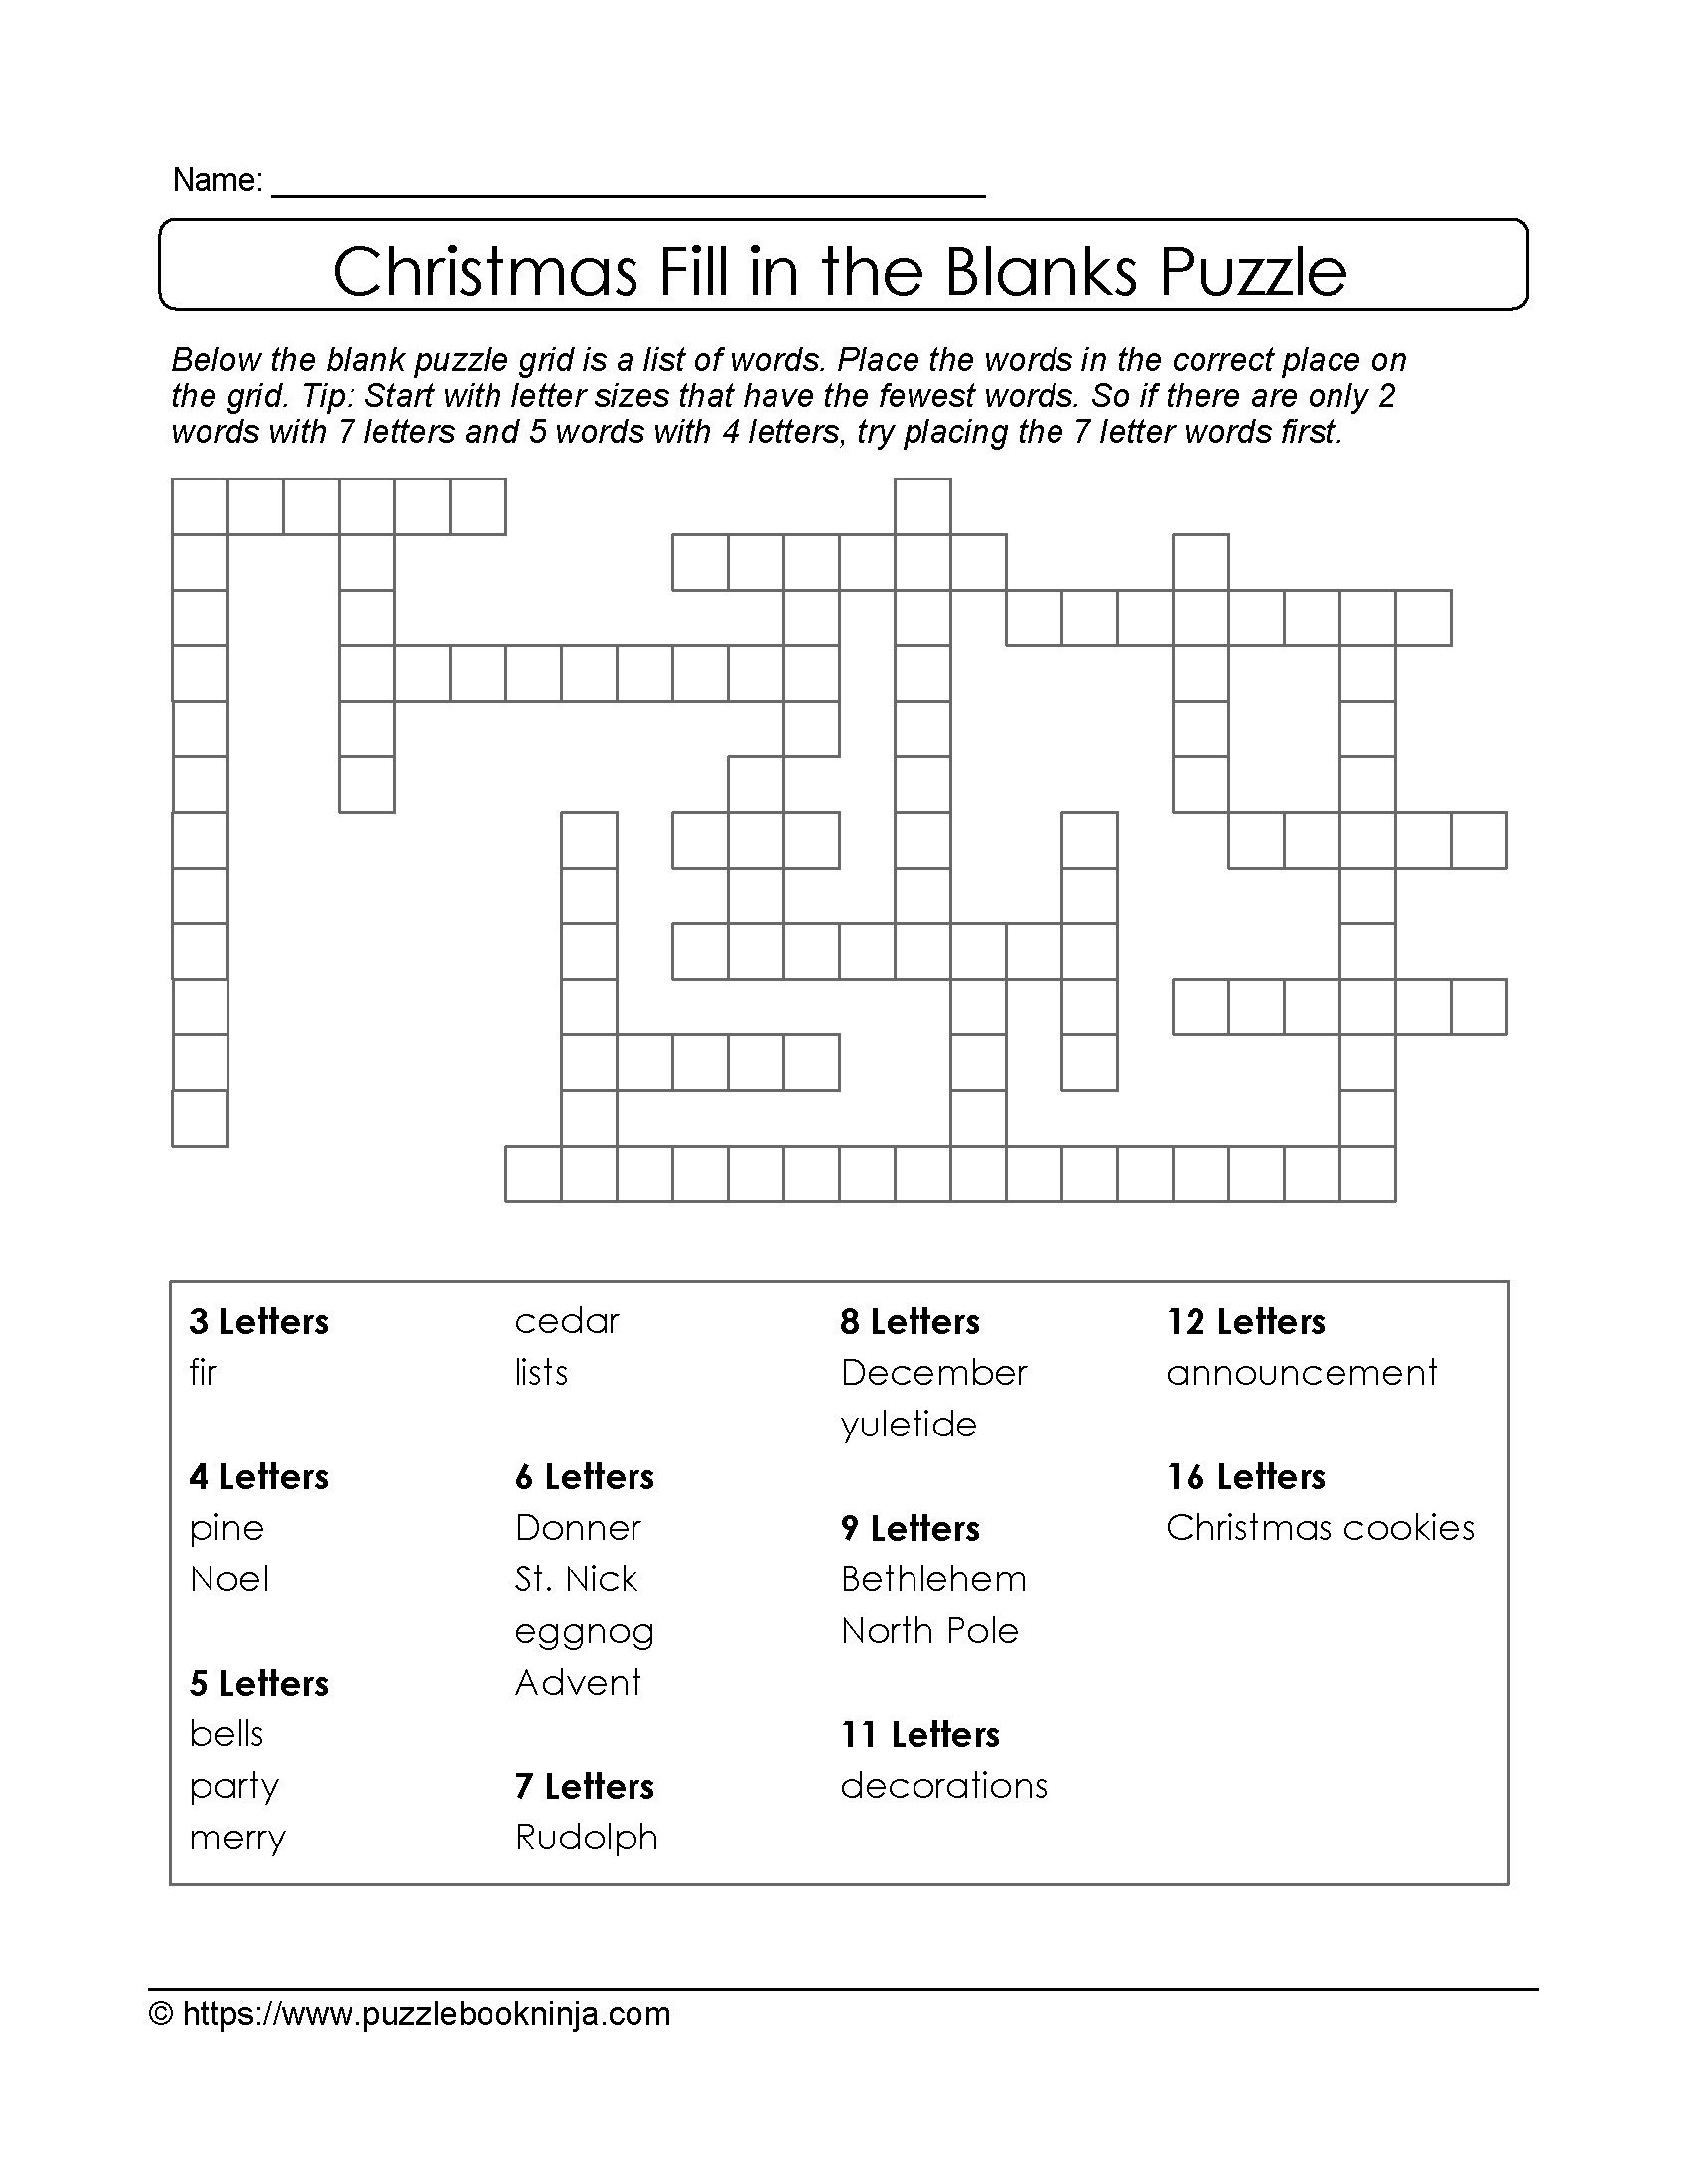 Christmas Printable Puzzle. Free Fill In The Blanks. | Christmas - Blank Crossword Puzzle Printable